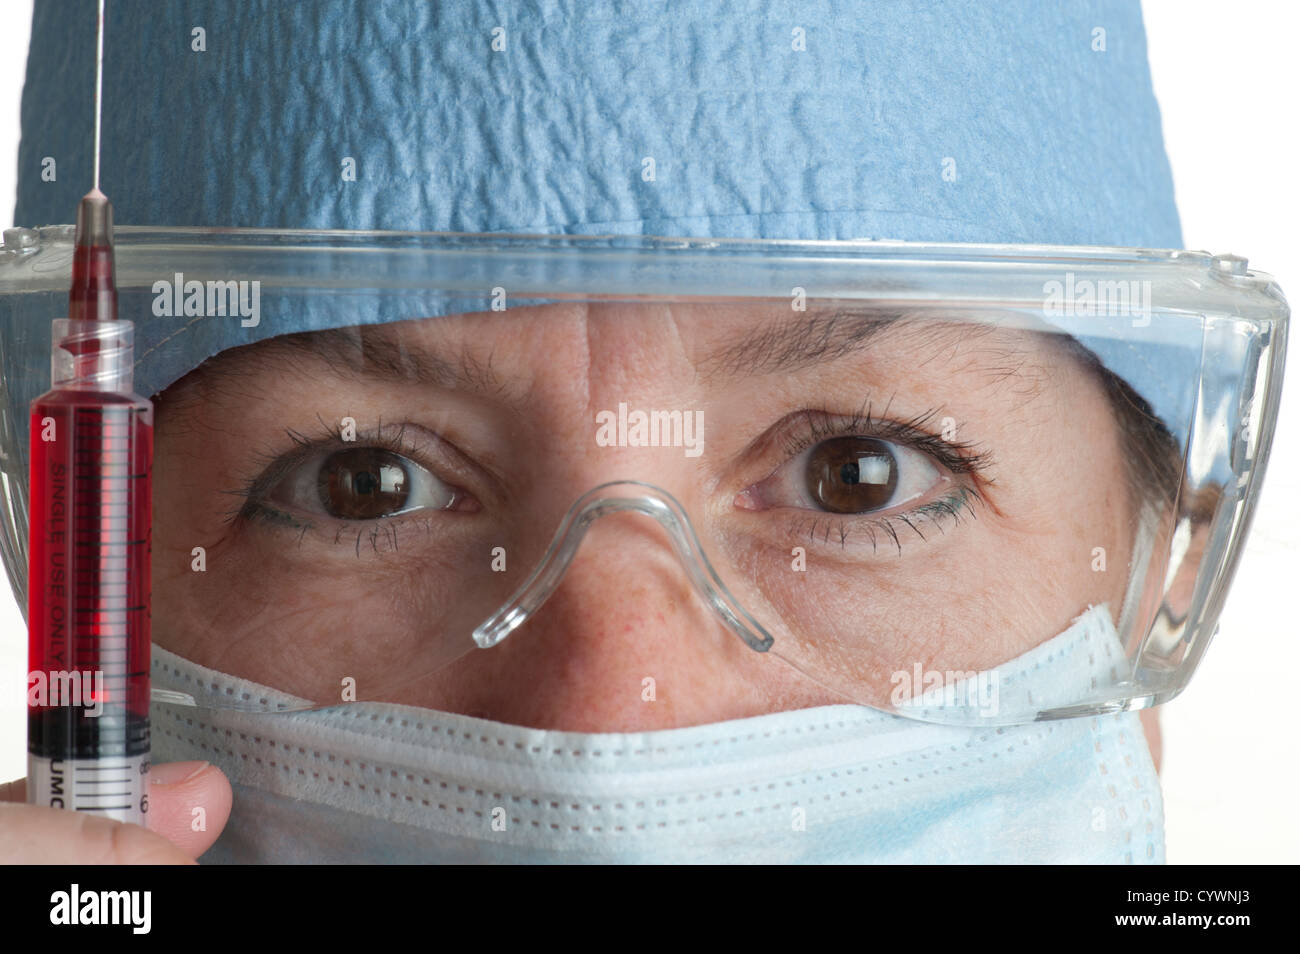 woman surgery doctor holding hypodermic needle Stock Photo